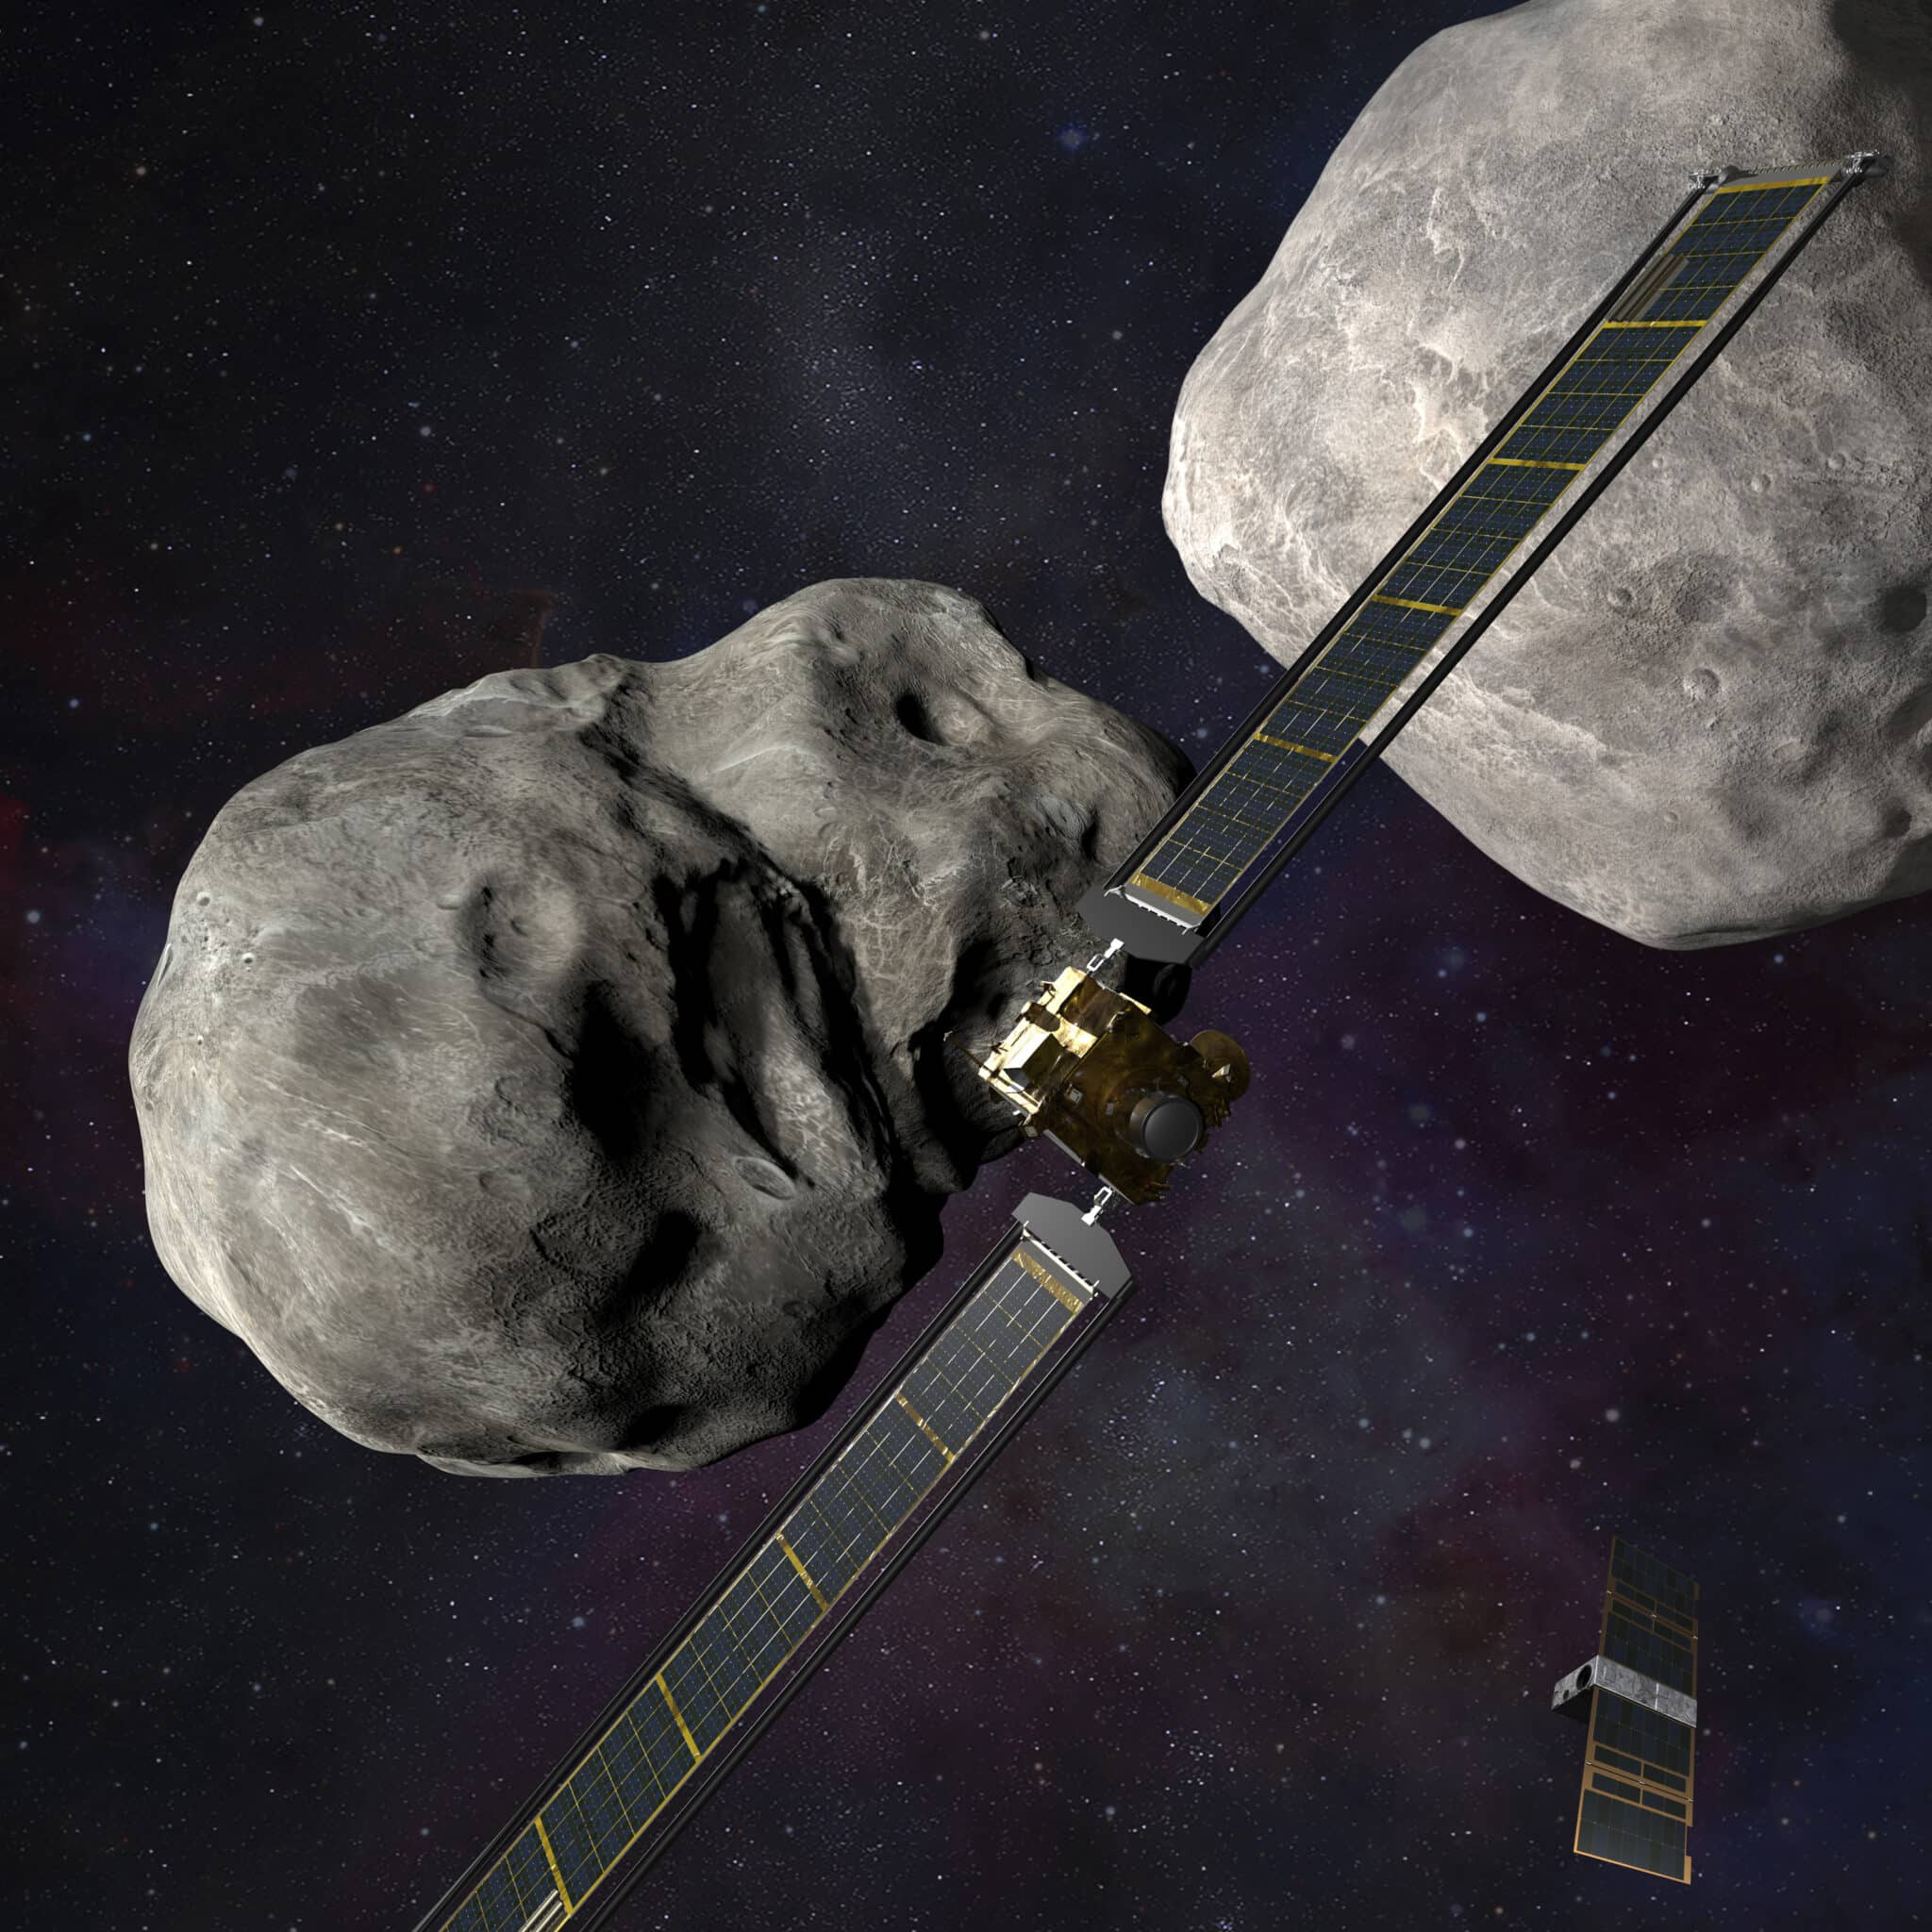 This illustration made available by Johns Hopkins APL and NASA depicts NASA's DART probe, center, and Italian Space Agency's (ASI) LICIACube, bottom right, at the Didymos system before impact with the asteroid Dimorphos, left. DART is expected to zero in on the asteroid Monday, Sept. 26, 2022, intent on slamming it head-on at 14,000 mph. The impact should be just enough to nudge the asteroid into a slightly tighter orbit around its companion space rock. (Steve Gribben/Johns Hopkins APL/NASA via AP)